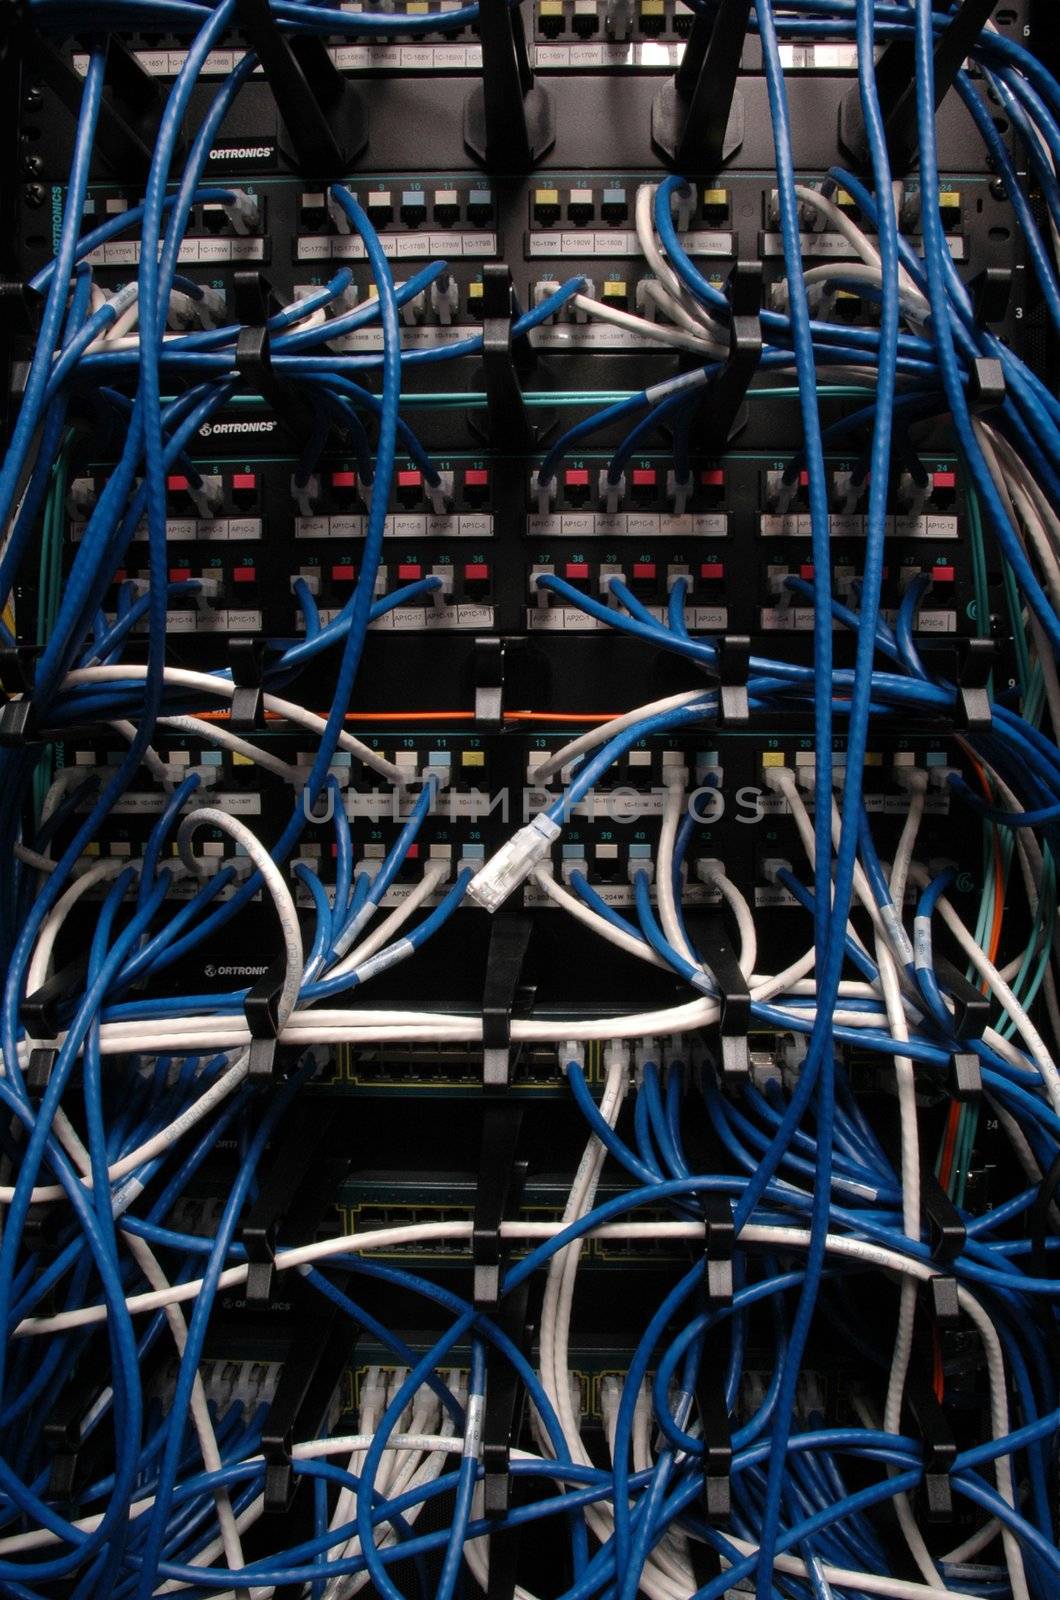 Banks of wires connecting servers, telephones and other digital systems